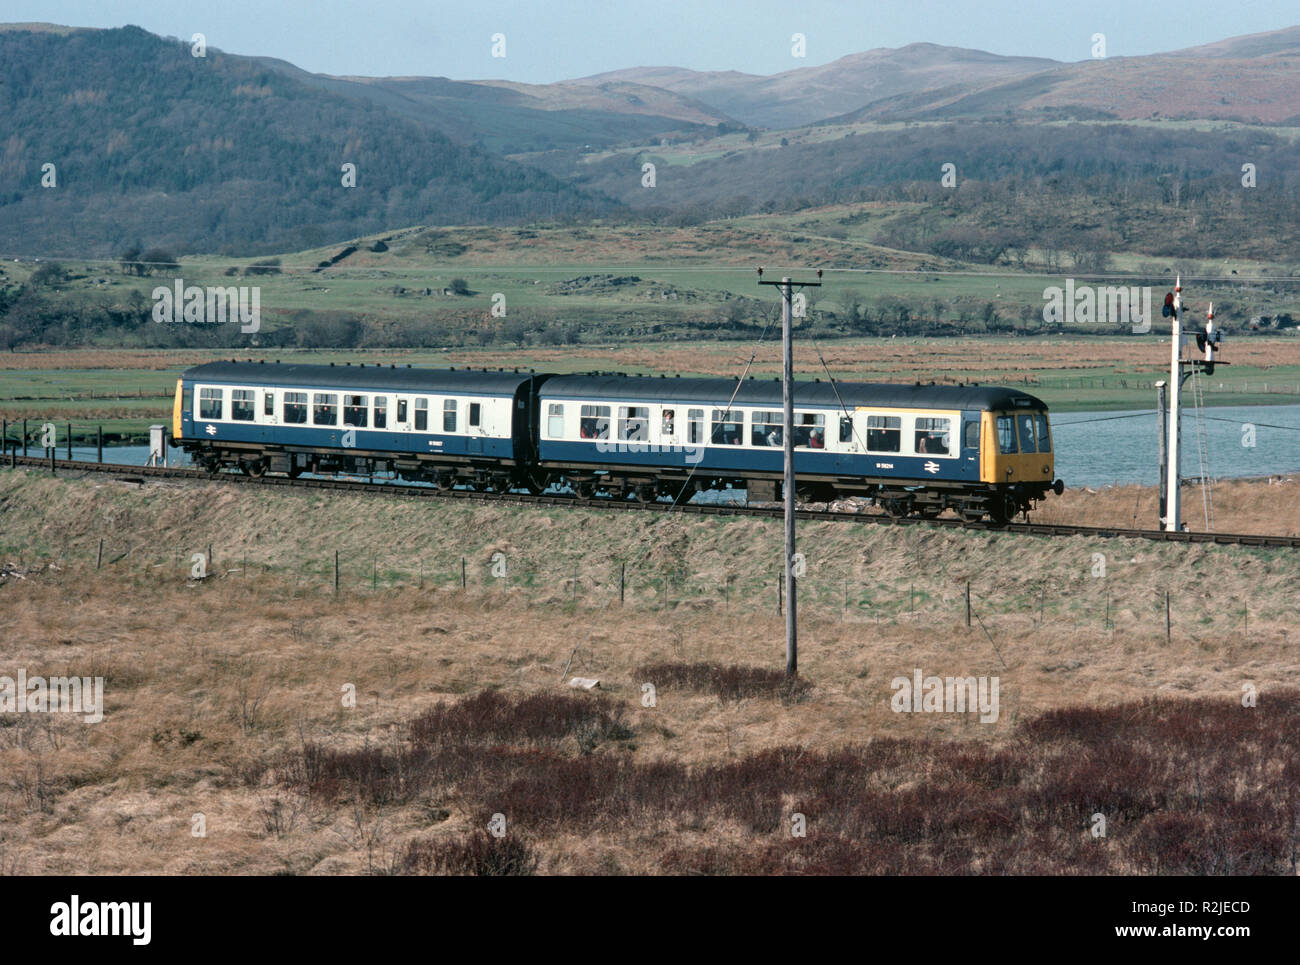 British Rail Diesel Multiple Unit, DMU, train on River Dovey marshlands, on the Dovey Junction to Pwllheli Cambrian Coast railway line, Merionethshire County, Wales, Great Britain Stock Photo